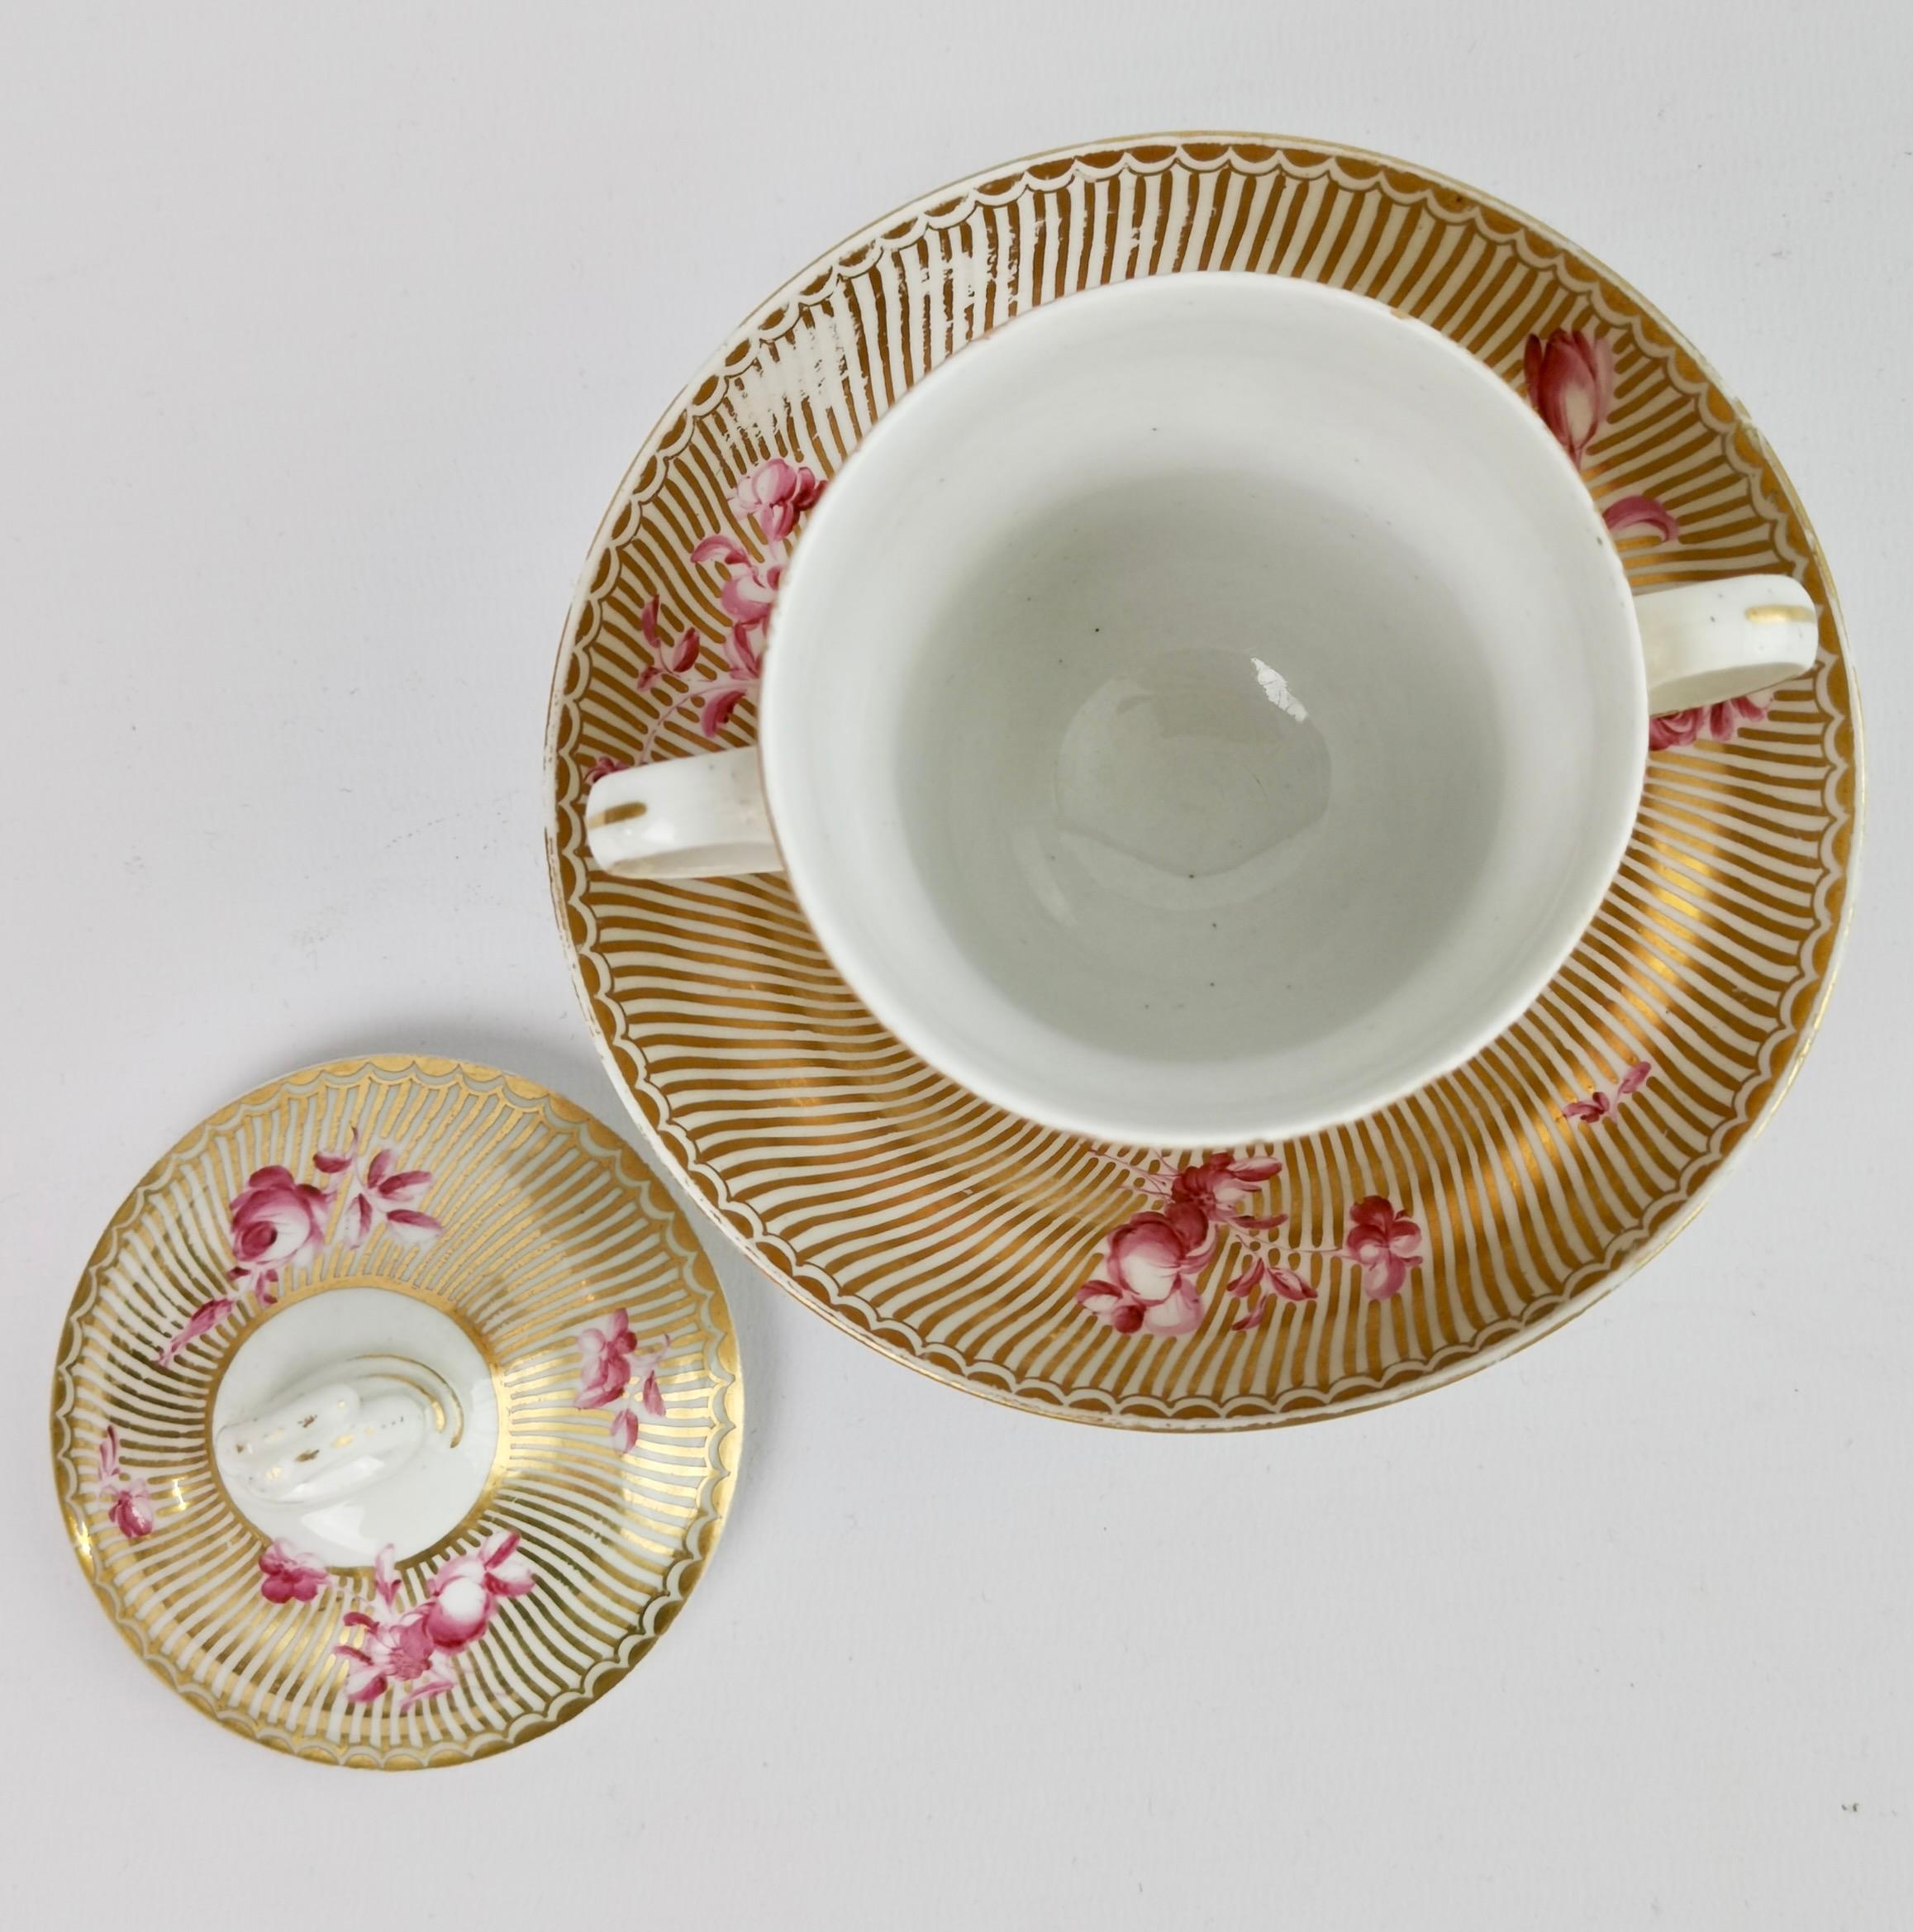 Chelsea-Derby Chocolate Cup Set, Gilt Stripes, Puce Flowers, Rococo 1770-1775 For Sale 6